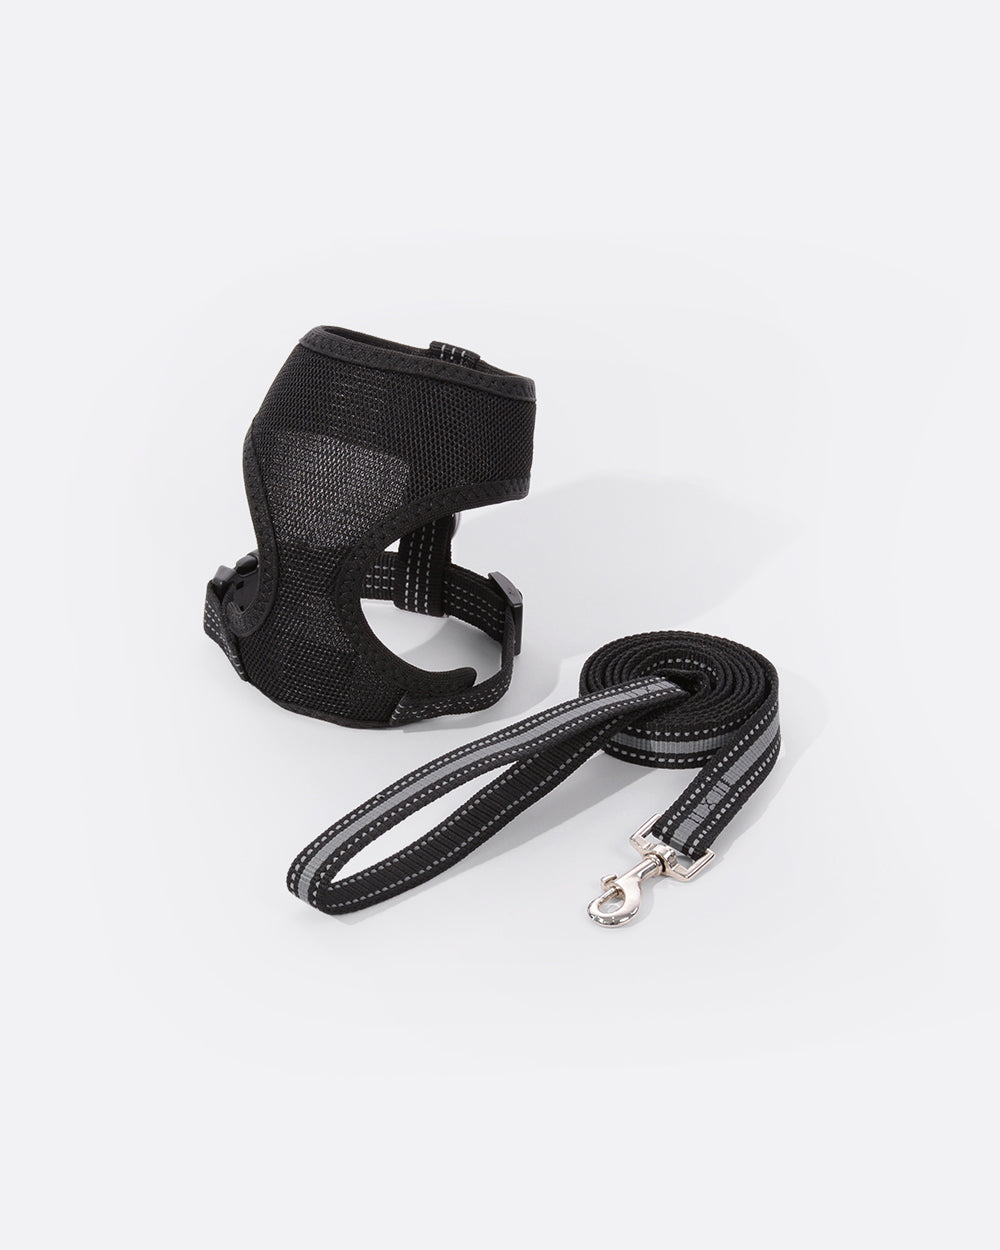 Simply Soft Harness and Leash Set - Classic Black